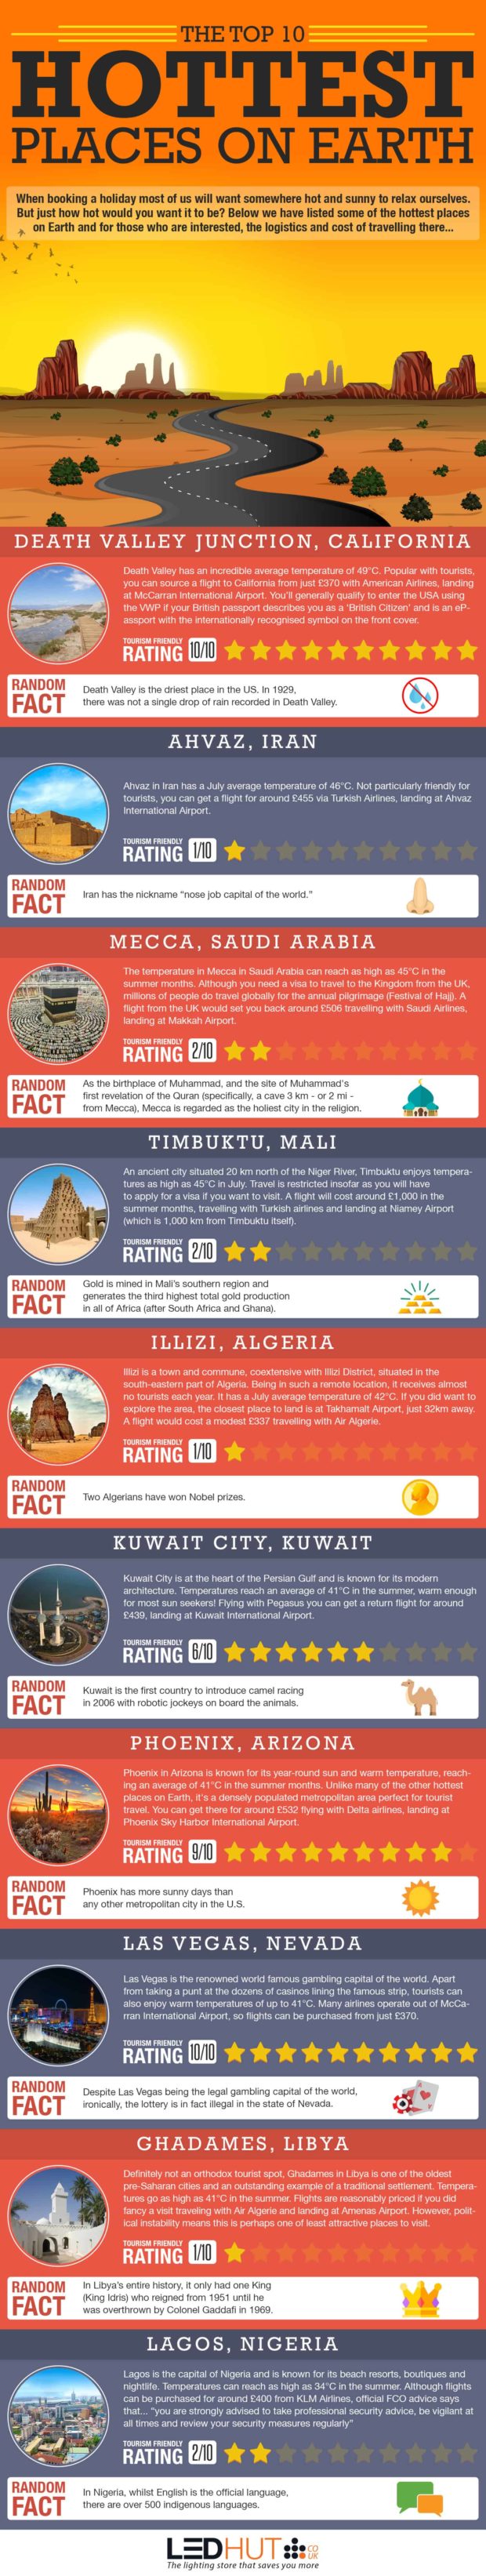 The Top 10 Hottest Places on Earth